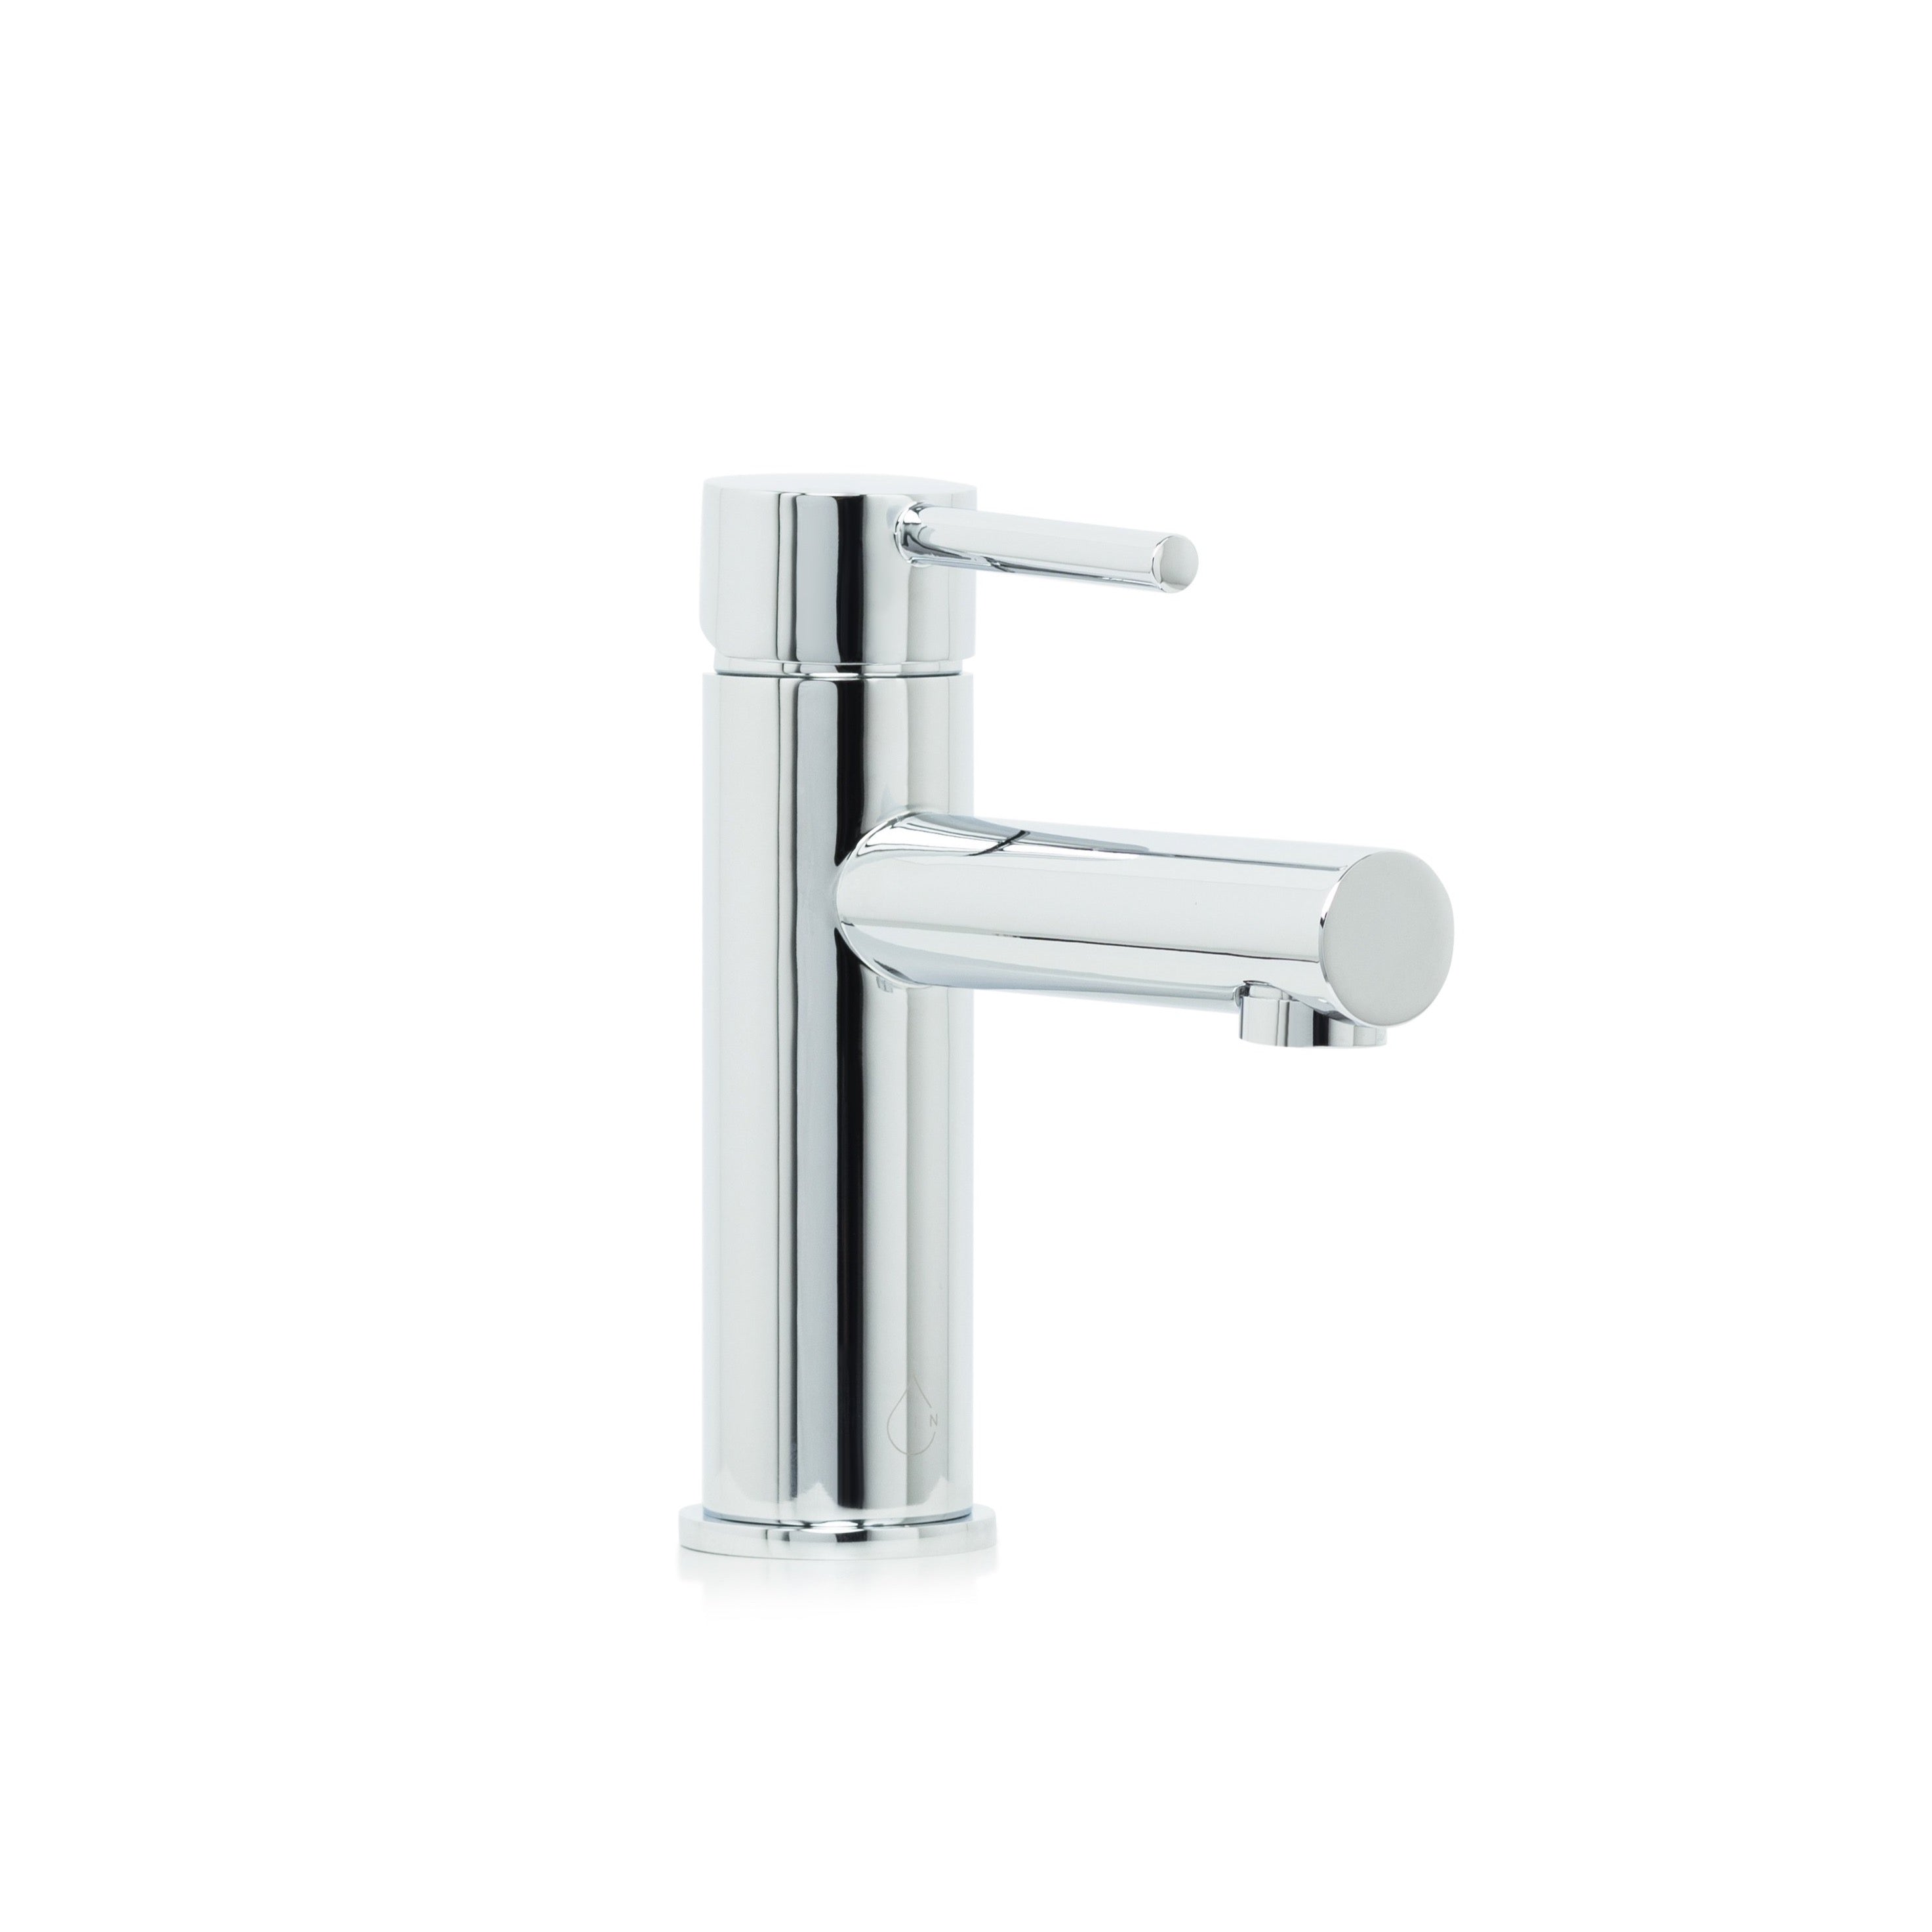 Bronte Pin Lever Basin Mixer with Straight Spout in Chrome